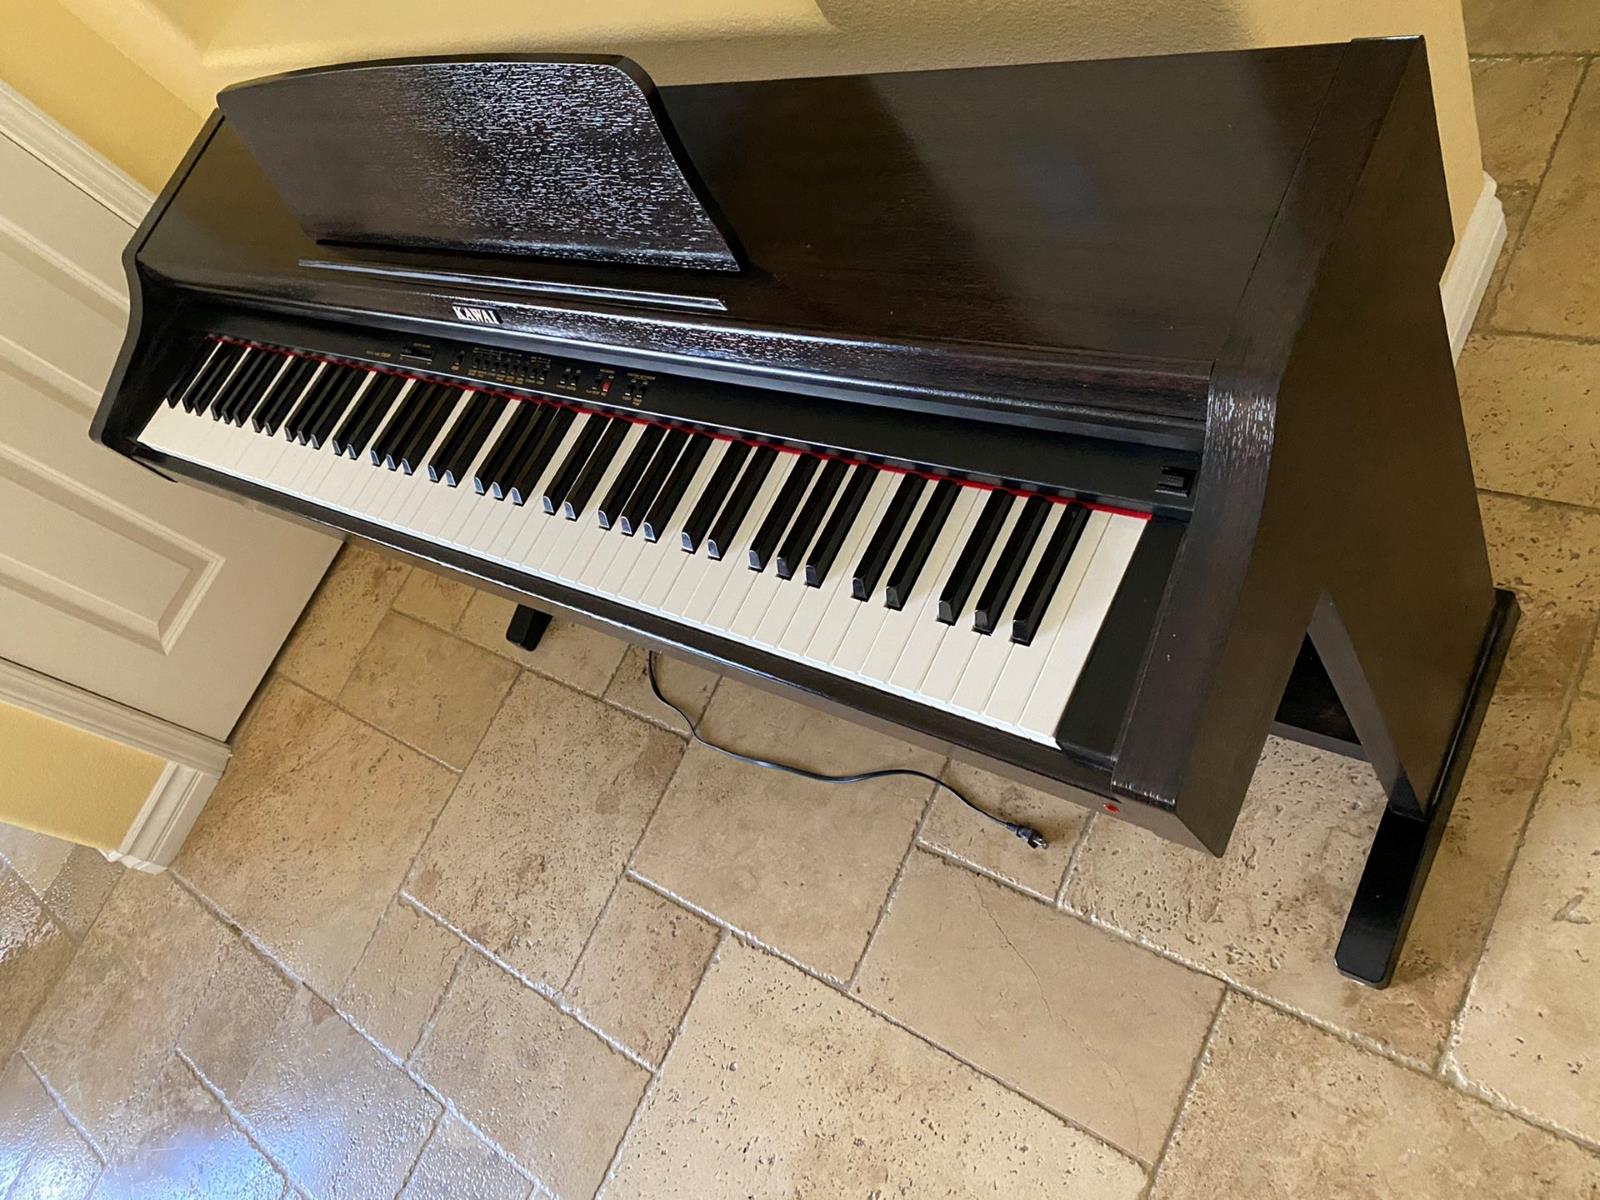 how-to-replace-the-power-switch-on-kawai-cn290-digital-piano